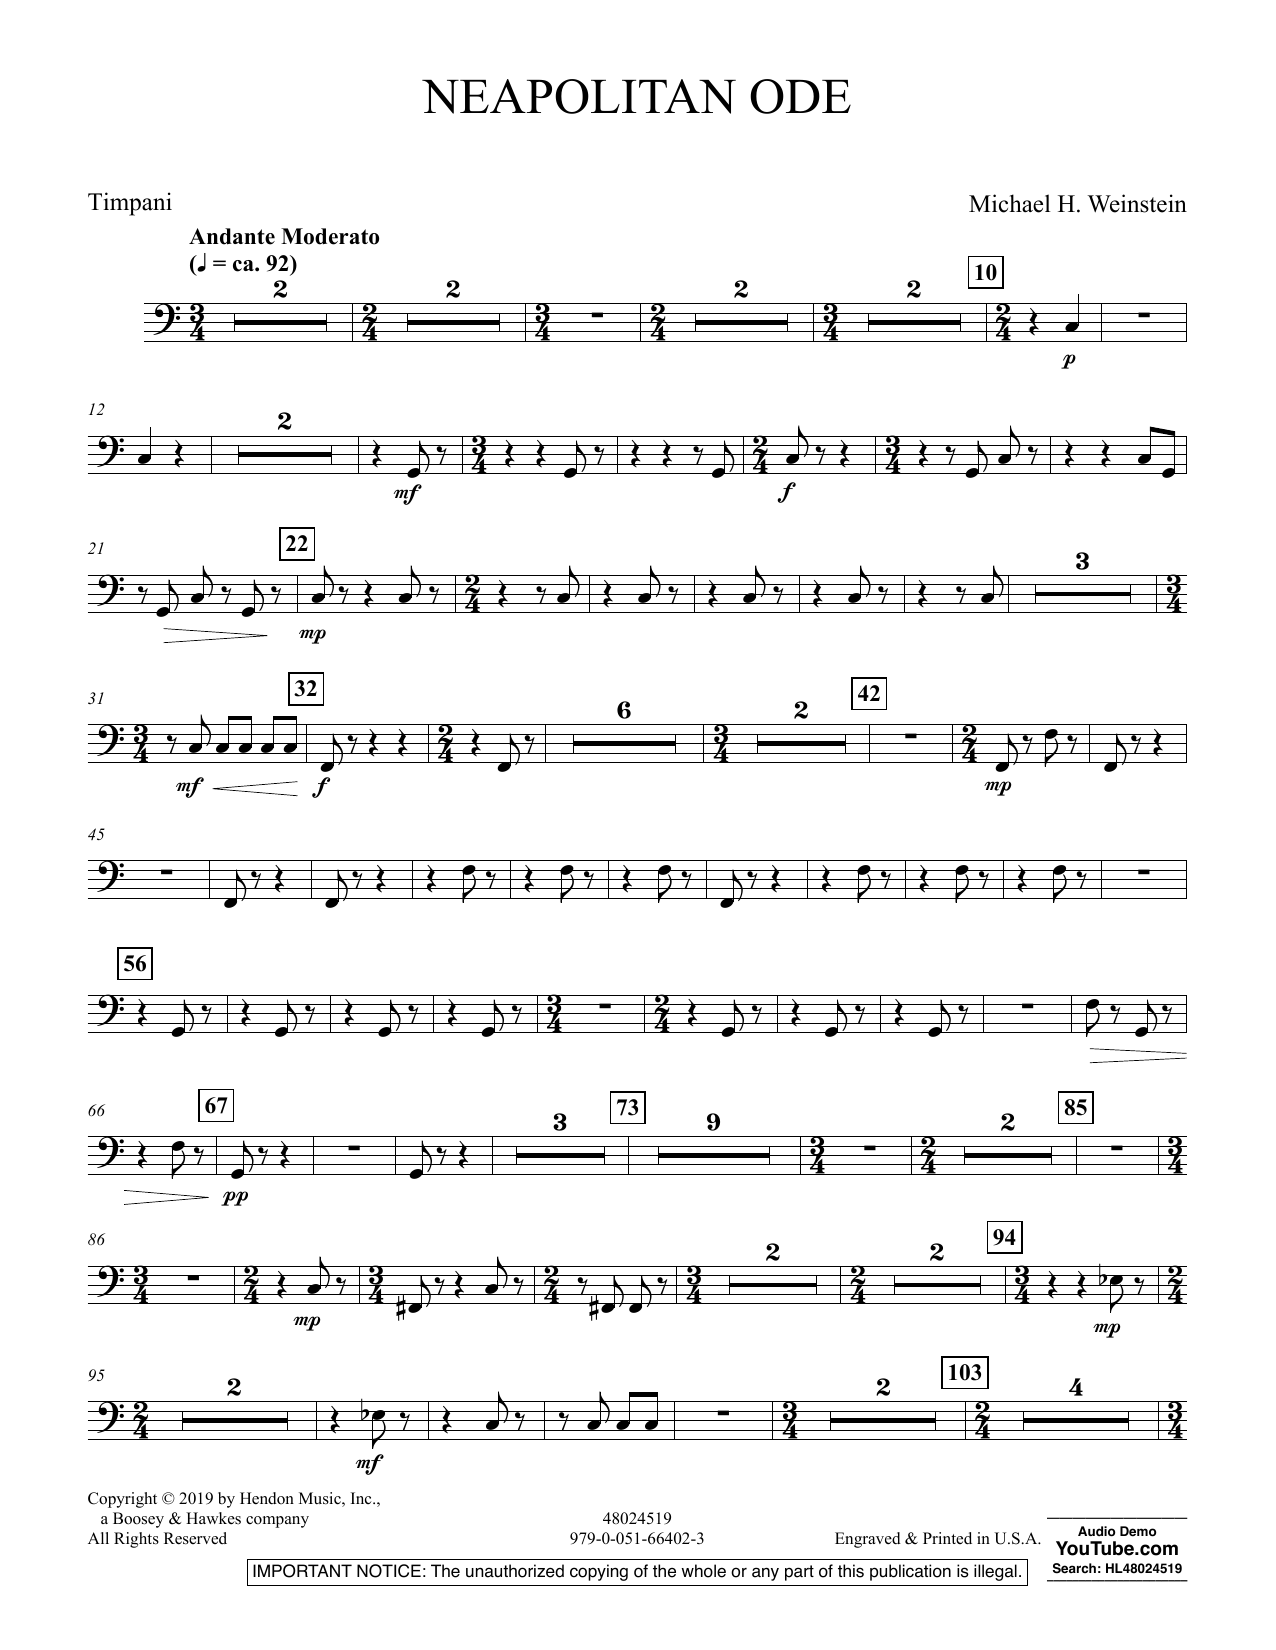 Michael H. Weinstein Neapolitan Ode - Timpani sheet music preview music notes and score for Concert Band including 2 page(s)